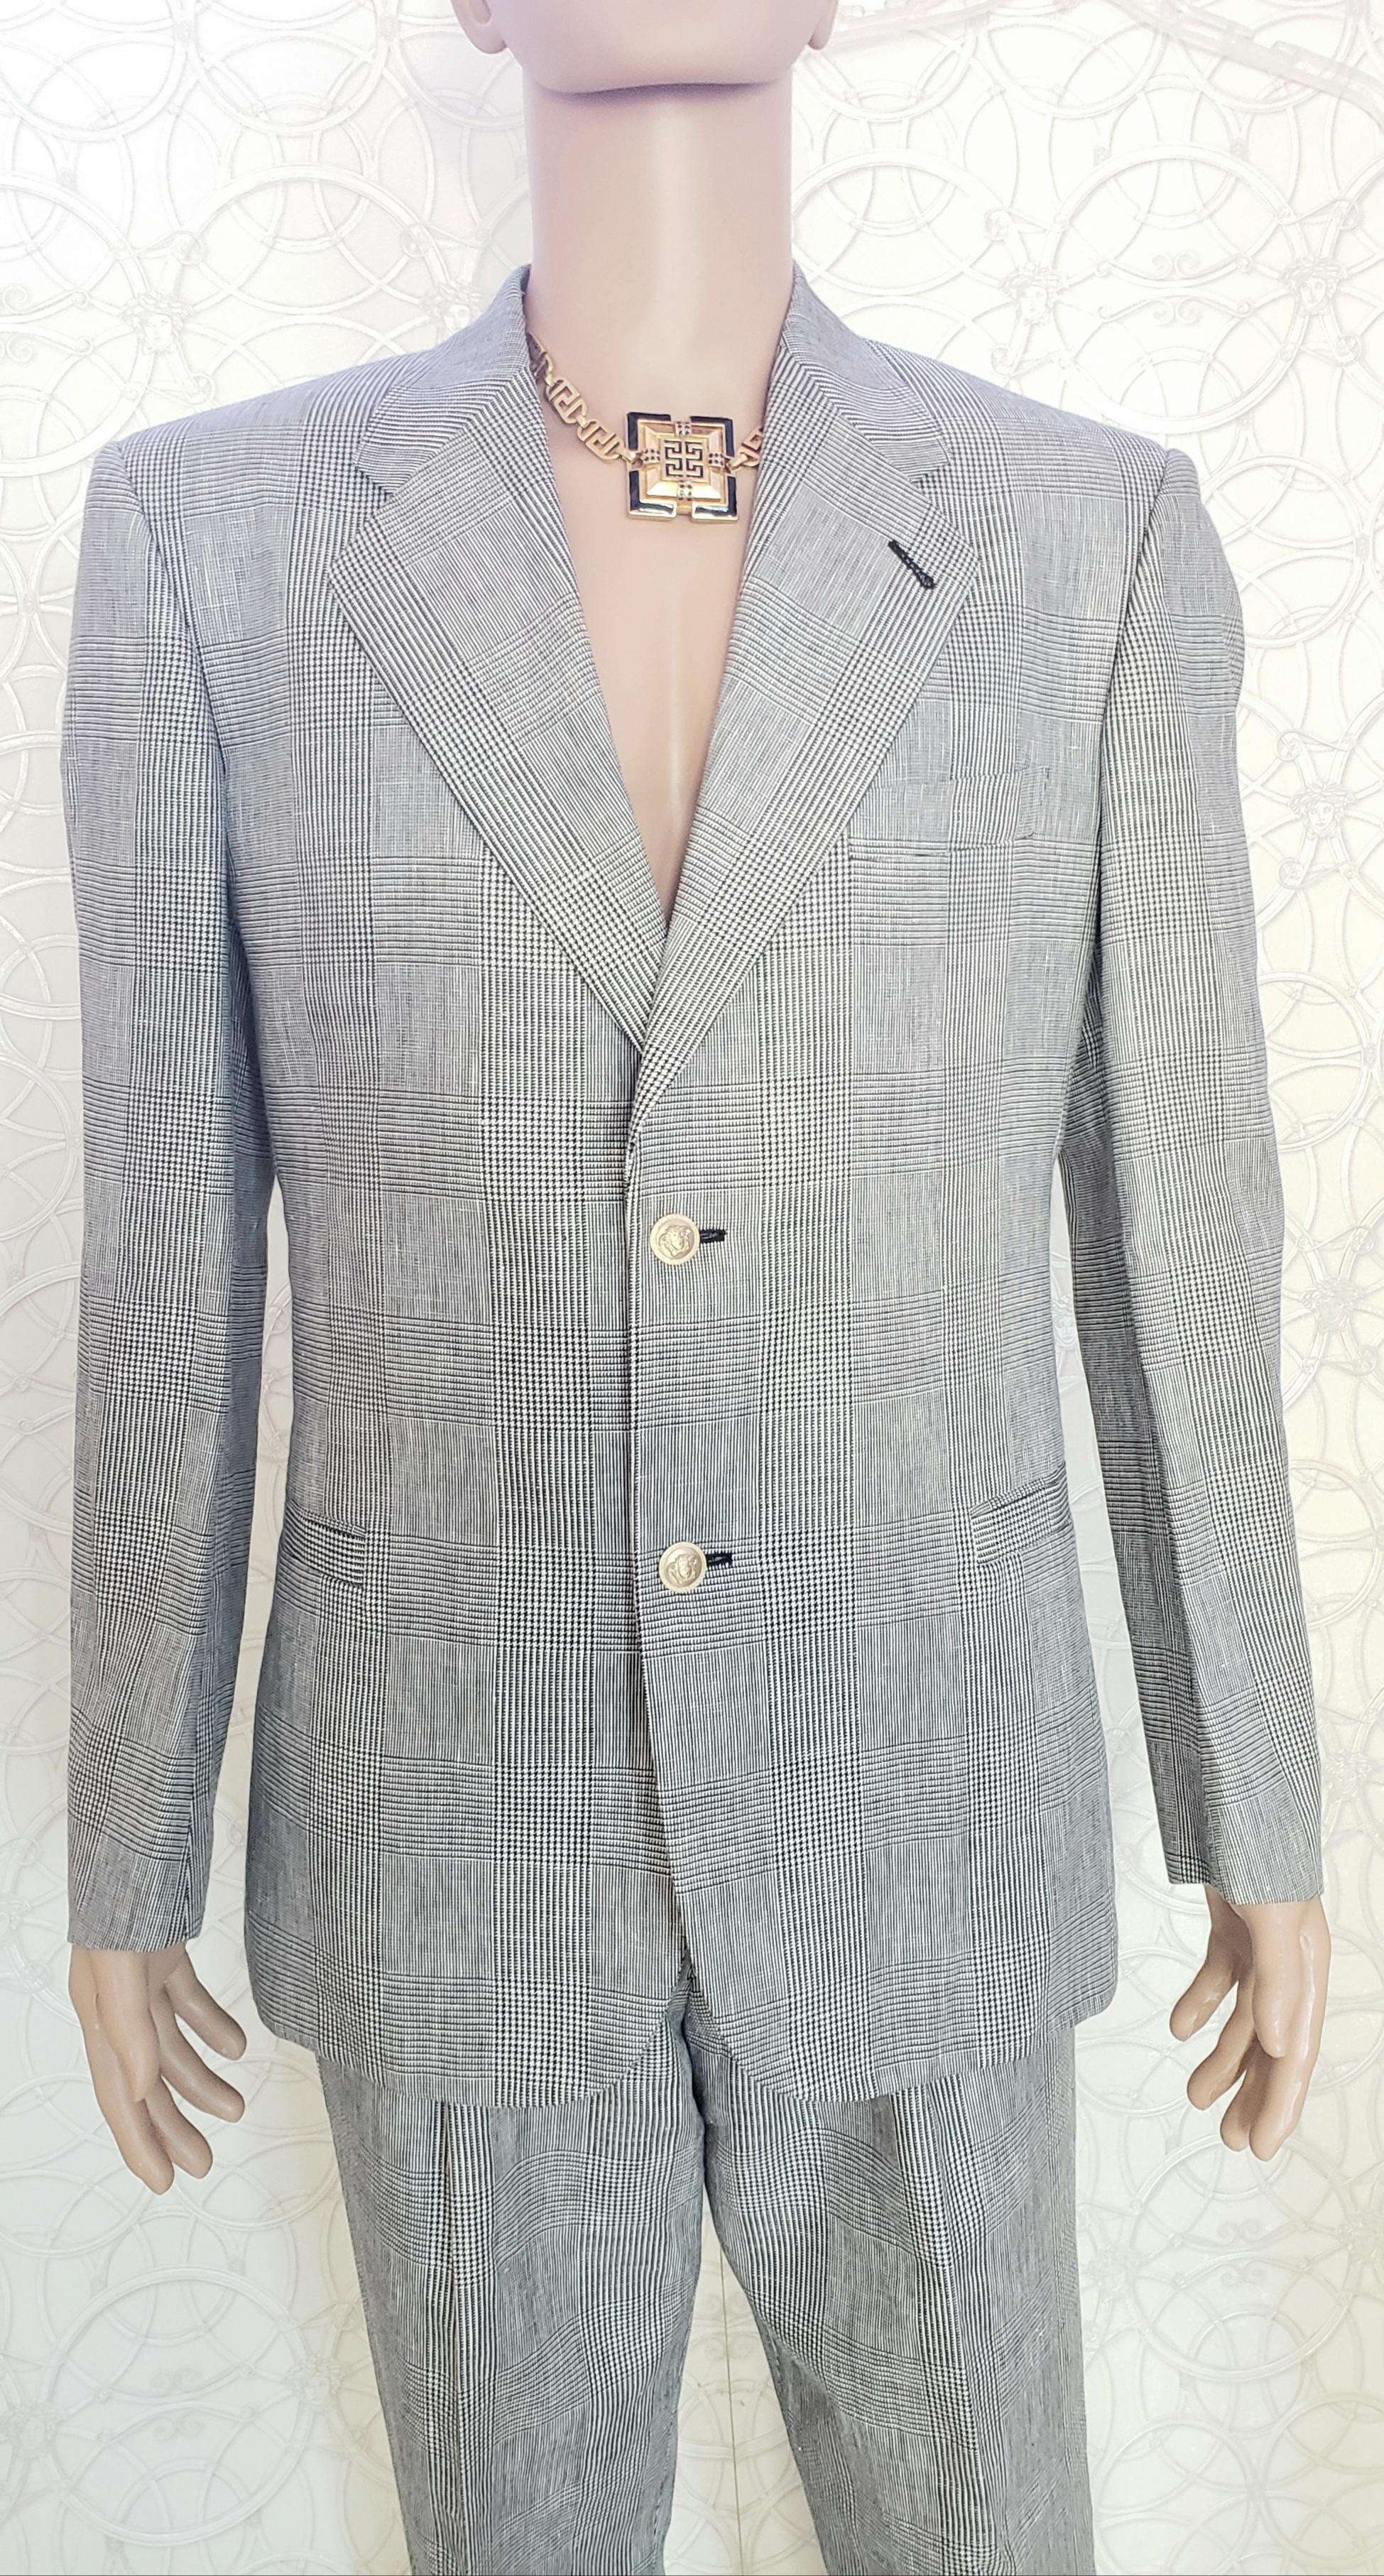 VERSACE S/S 2012 look # 2 BRAND NEW GRAY SUIT 48 - 38 (M) For Sale 5